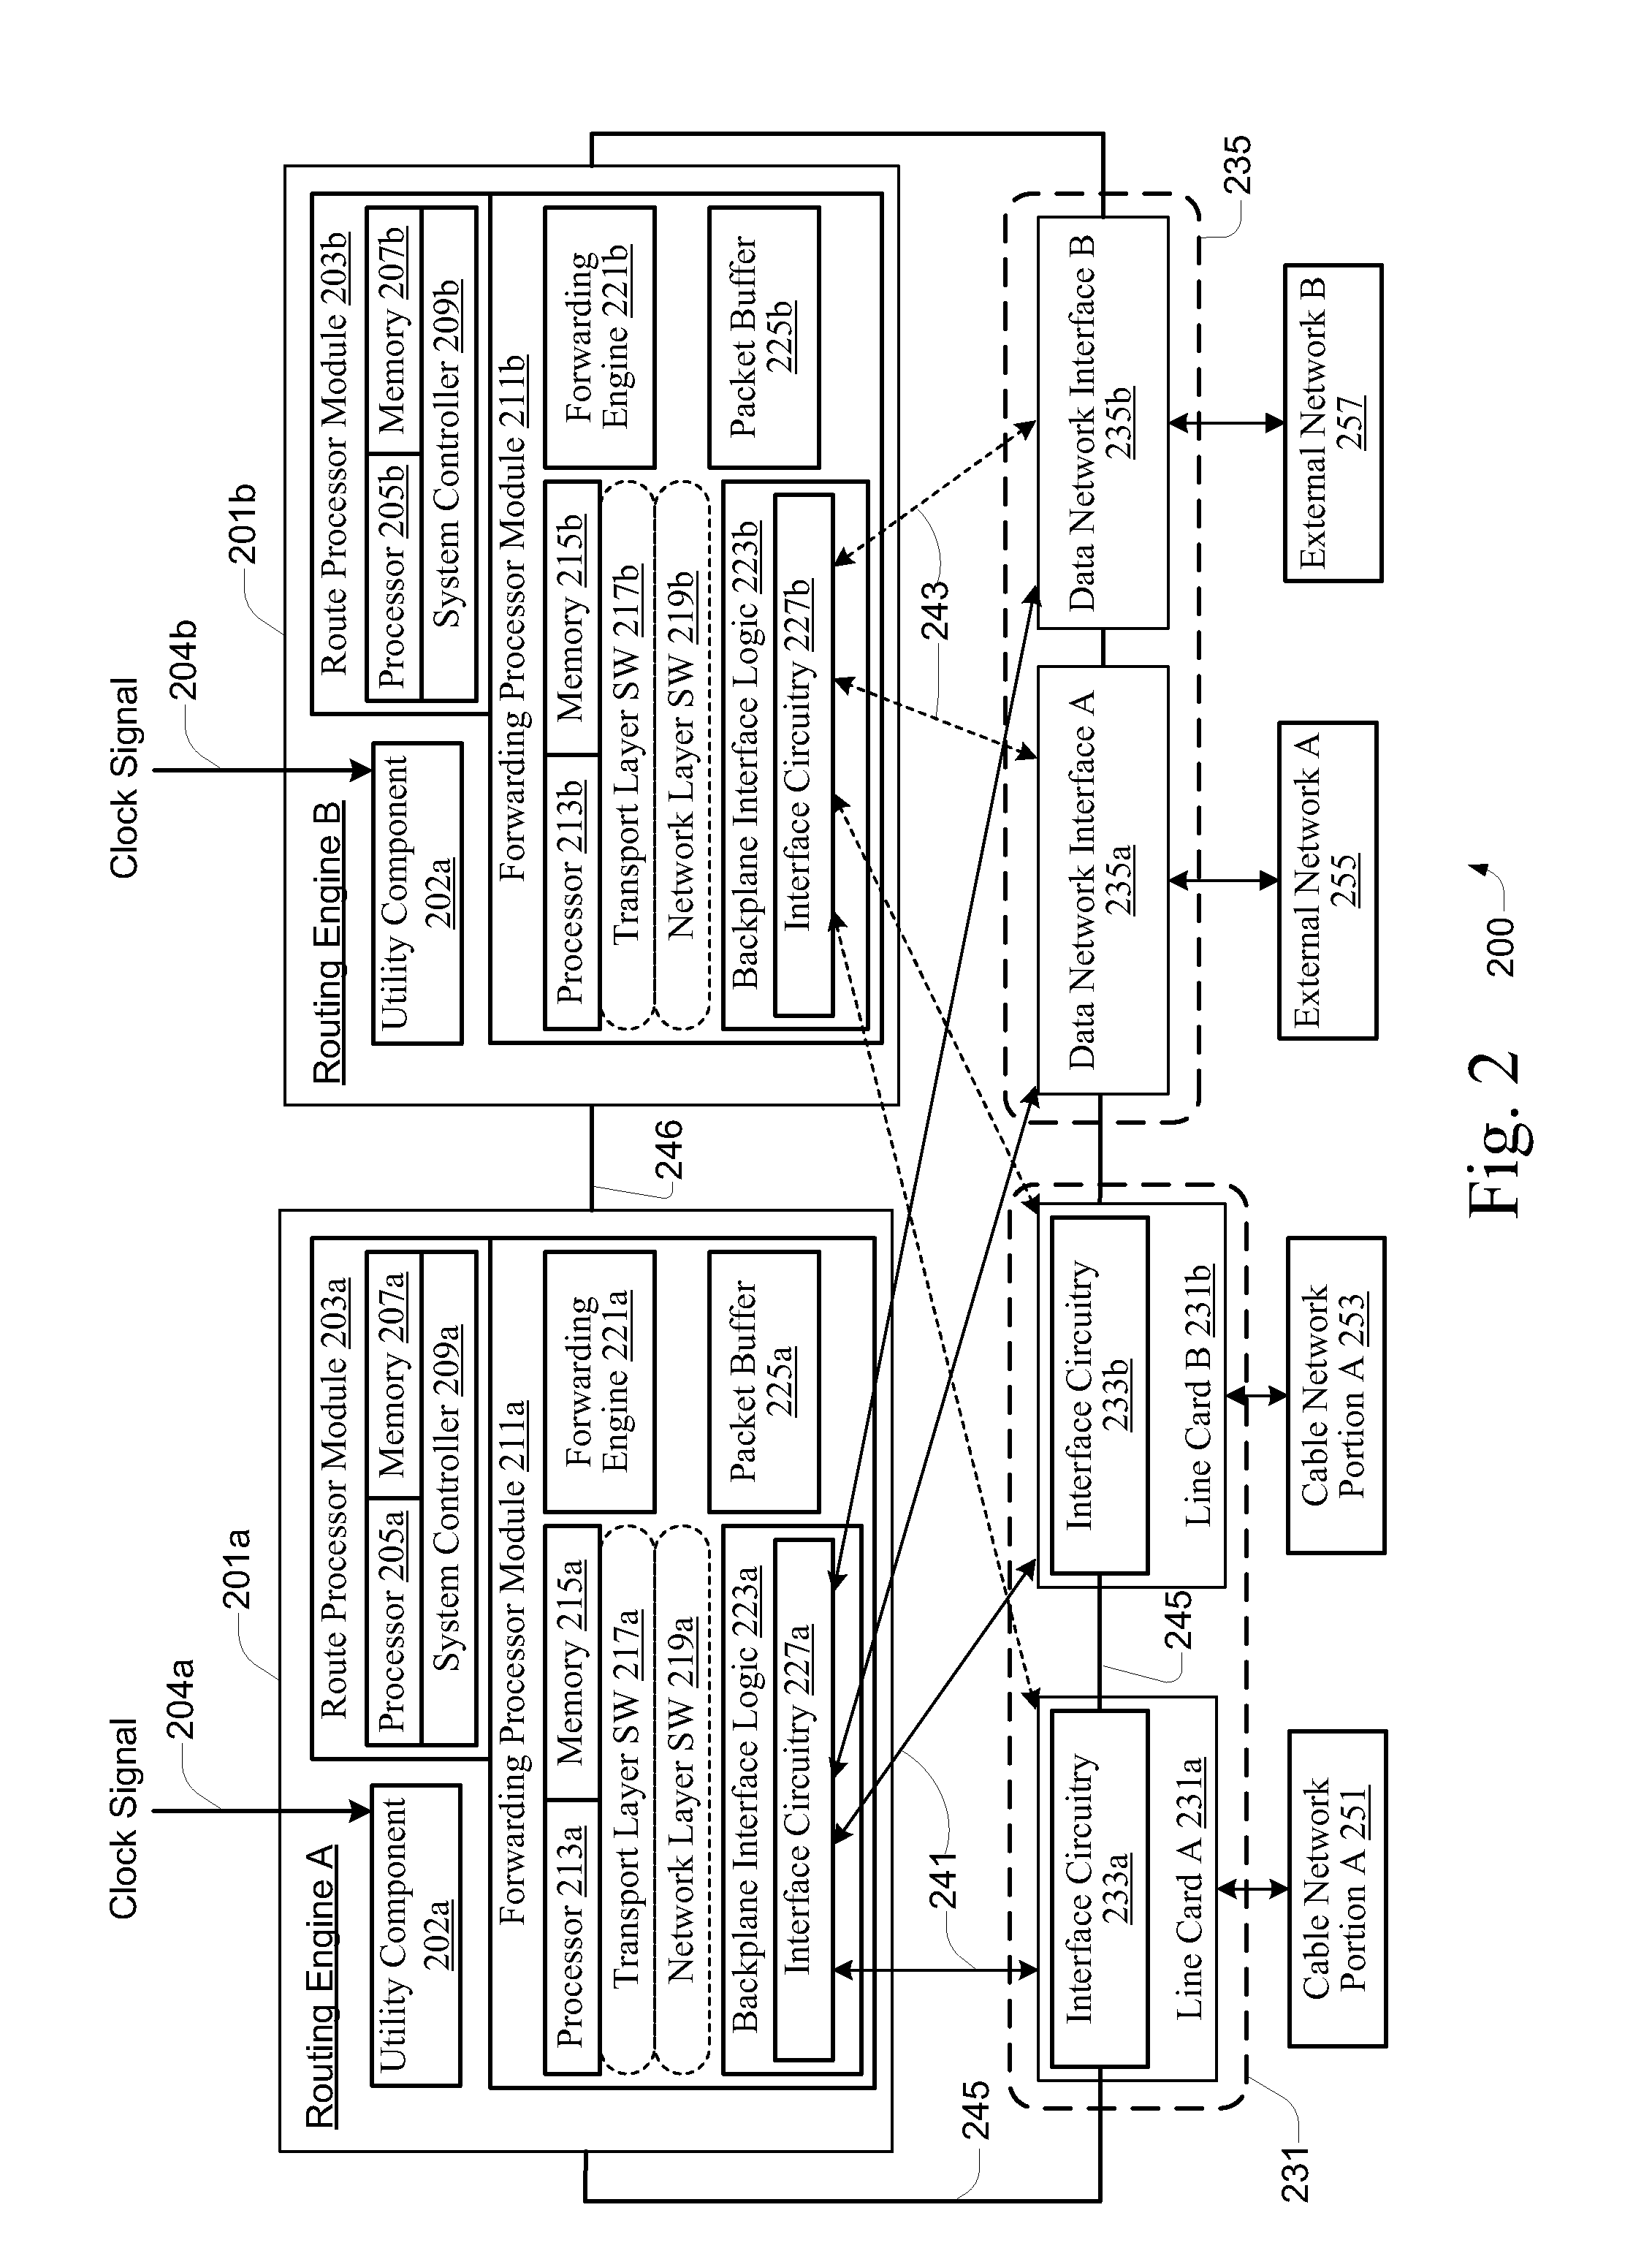 QOS on Bonded Channels of a Shared Access Cable Network